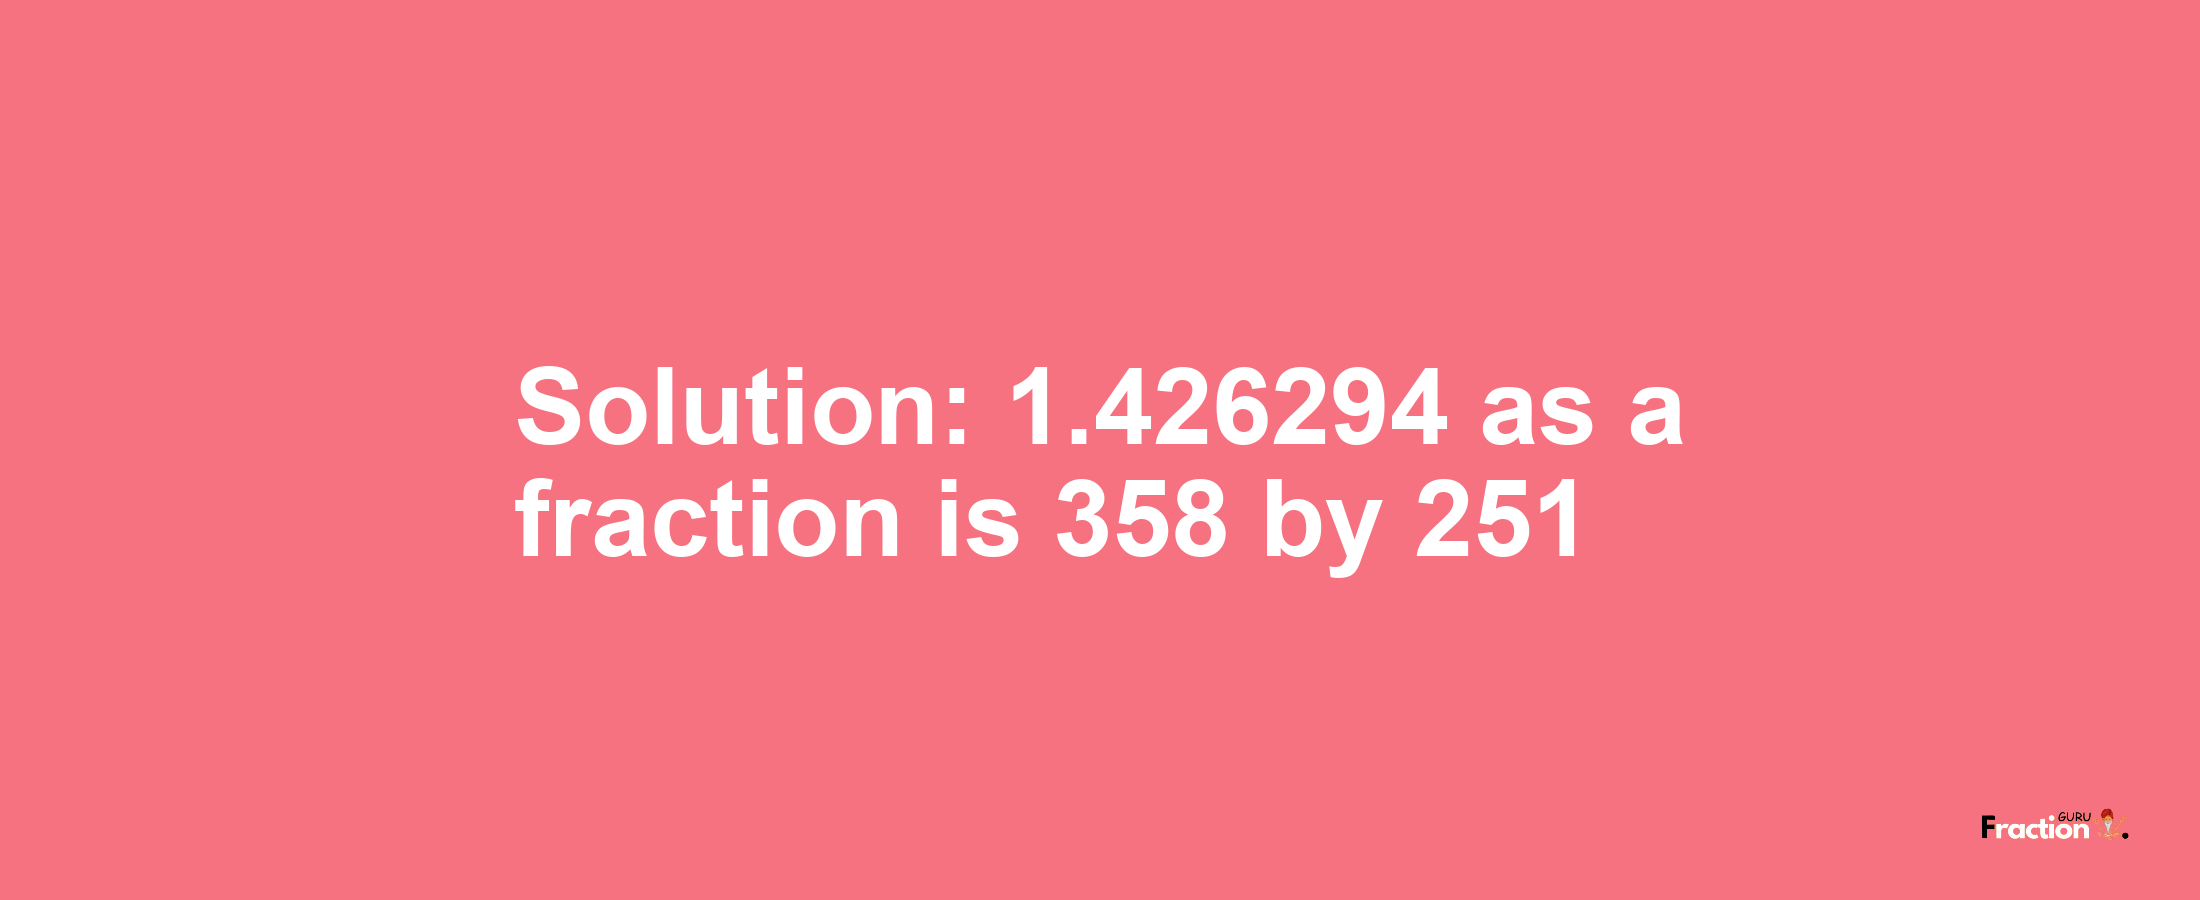 Solution:1.426294 as a fraction is 358/251